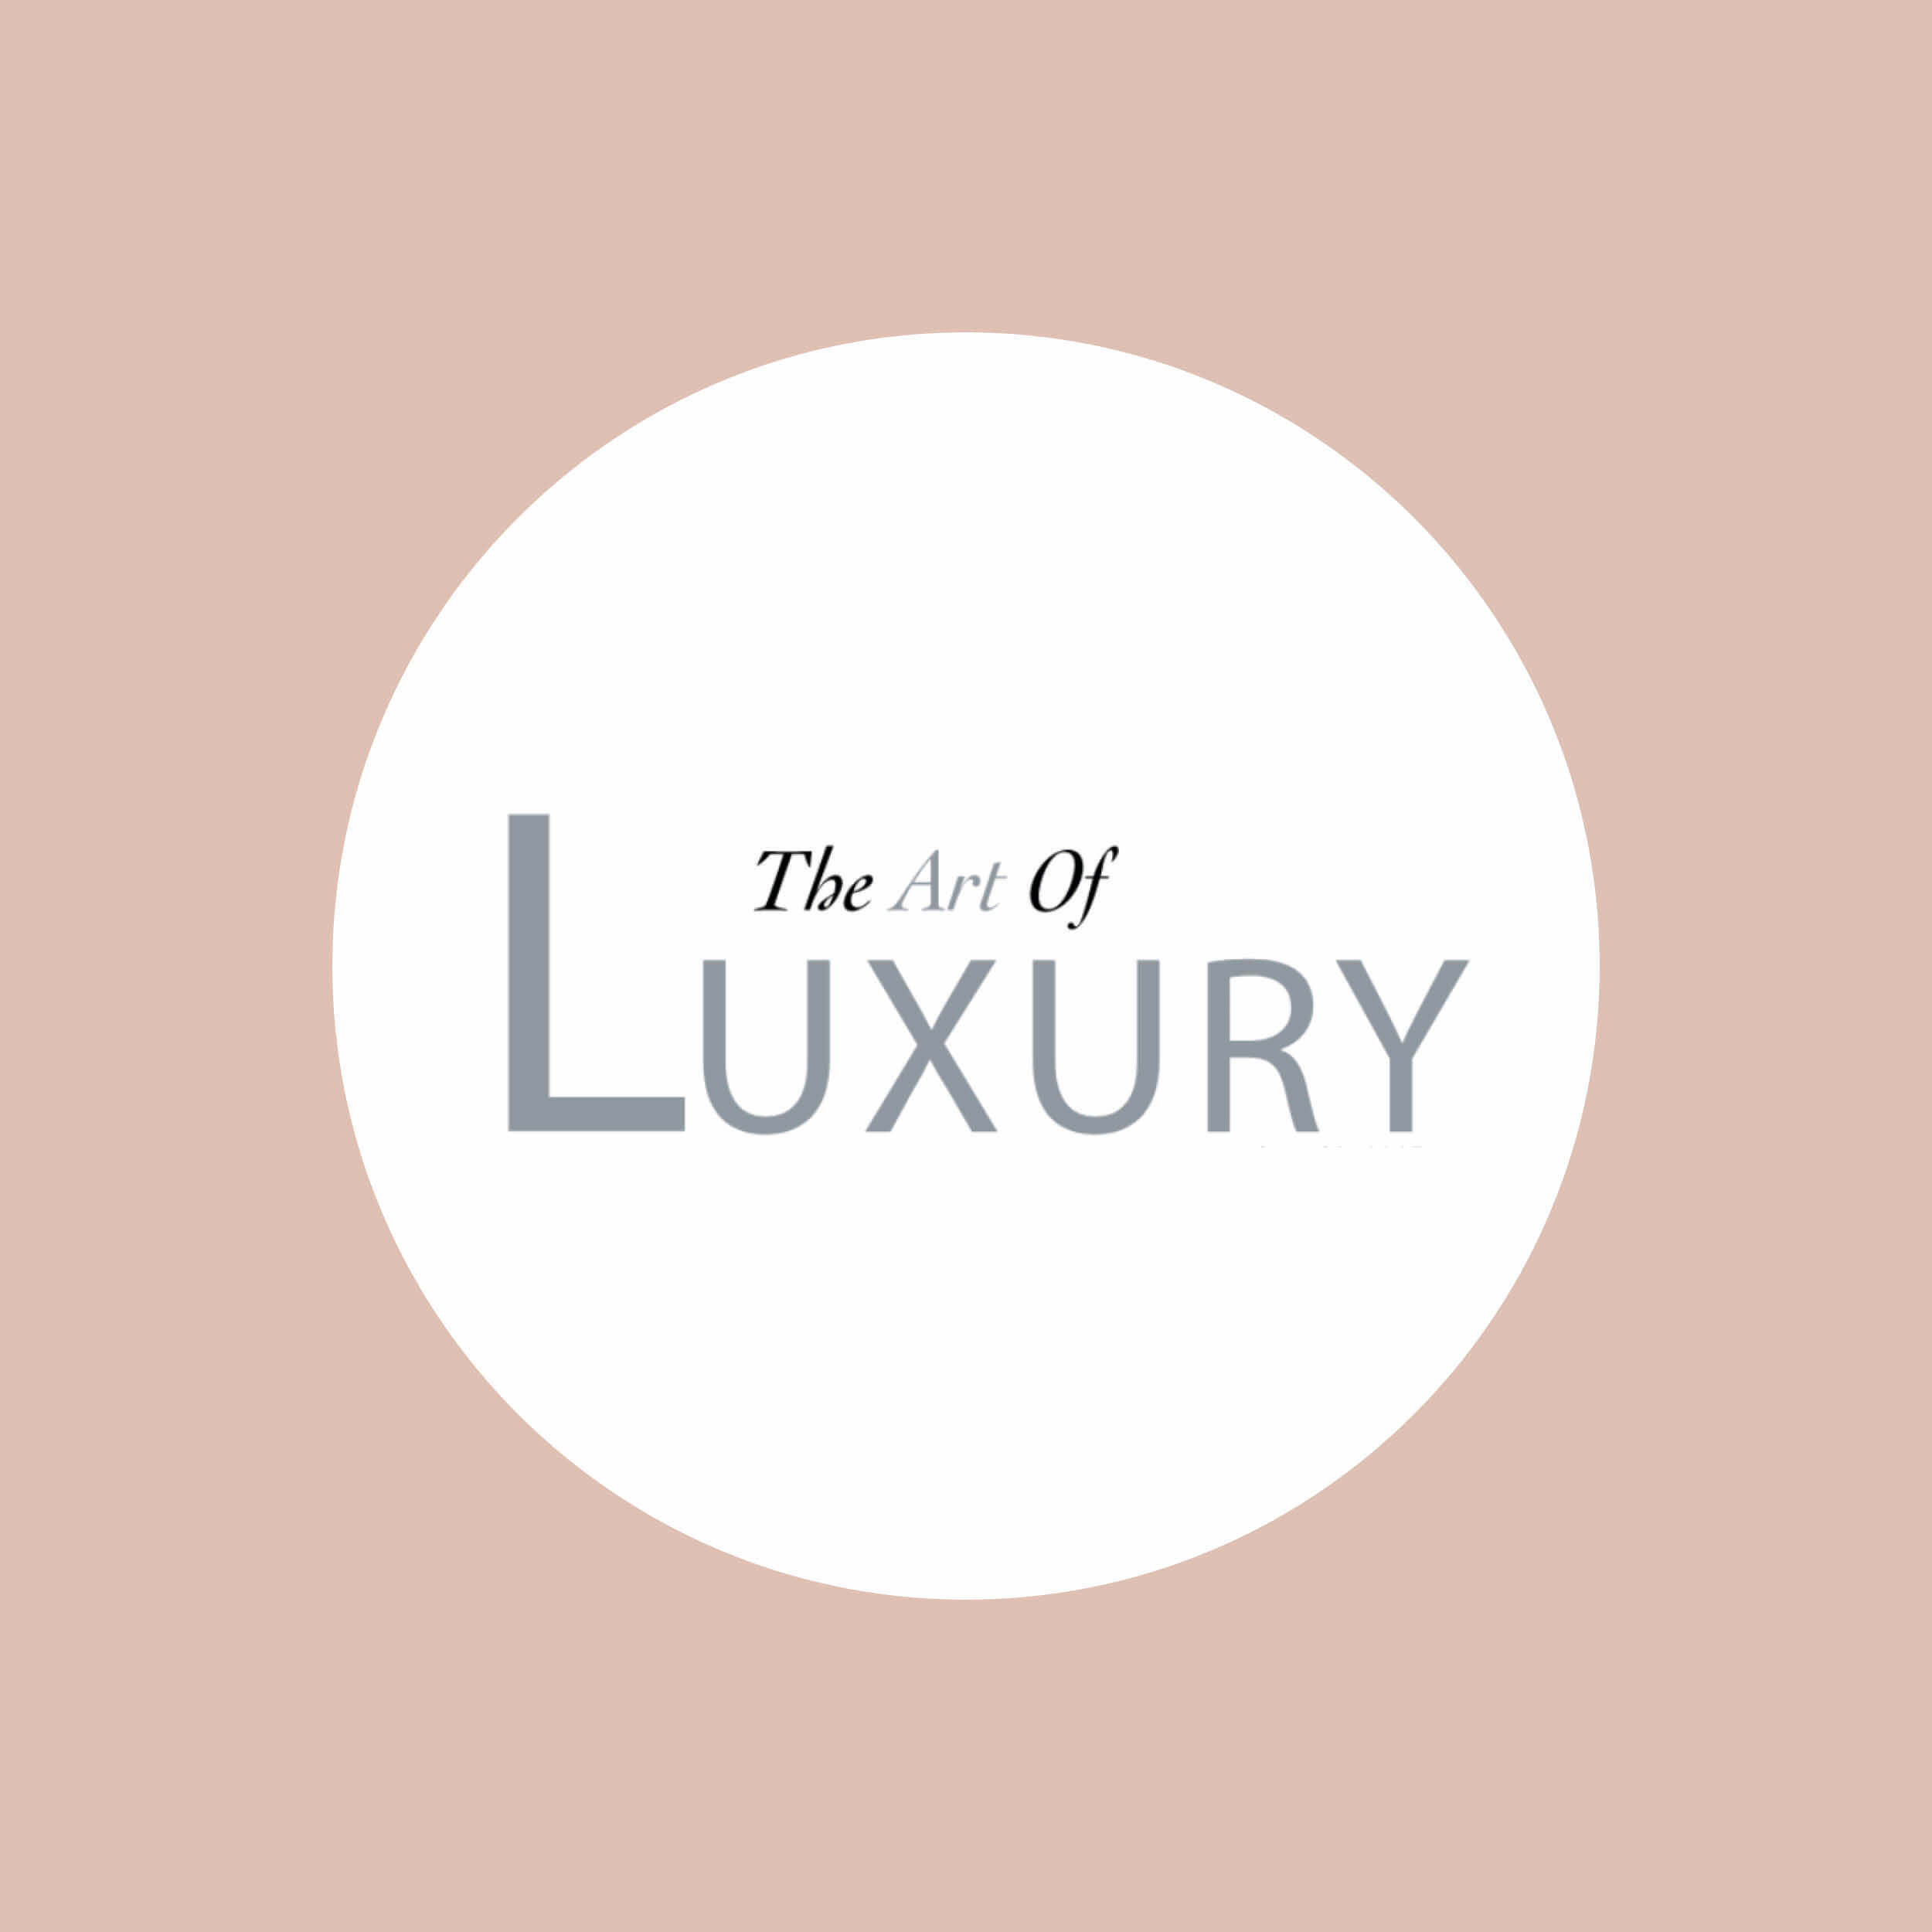 The Art of Luxury – Some words